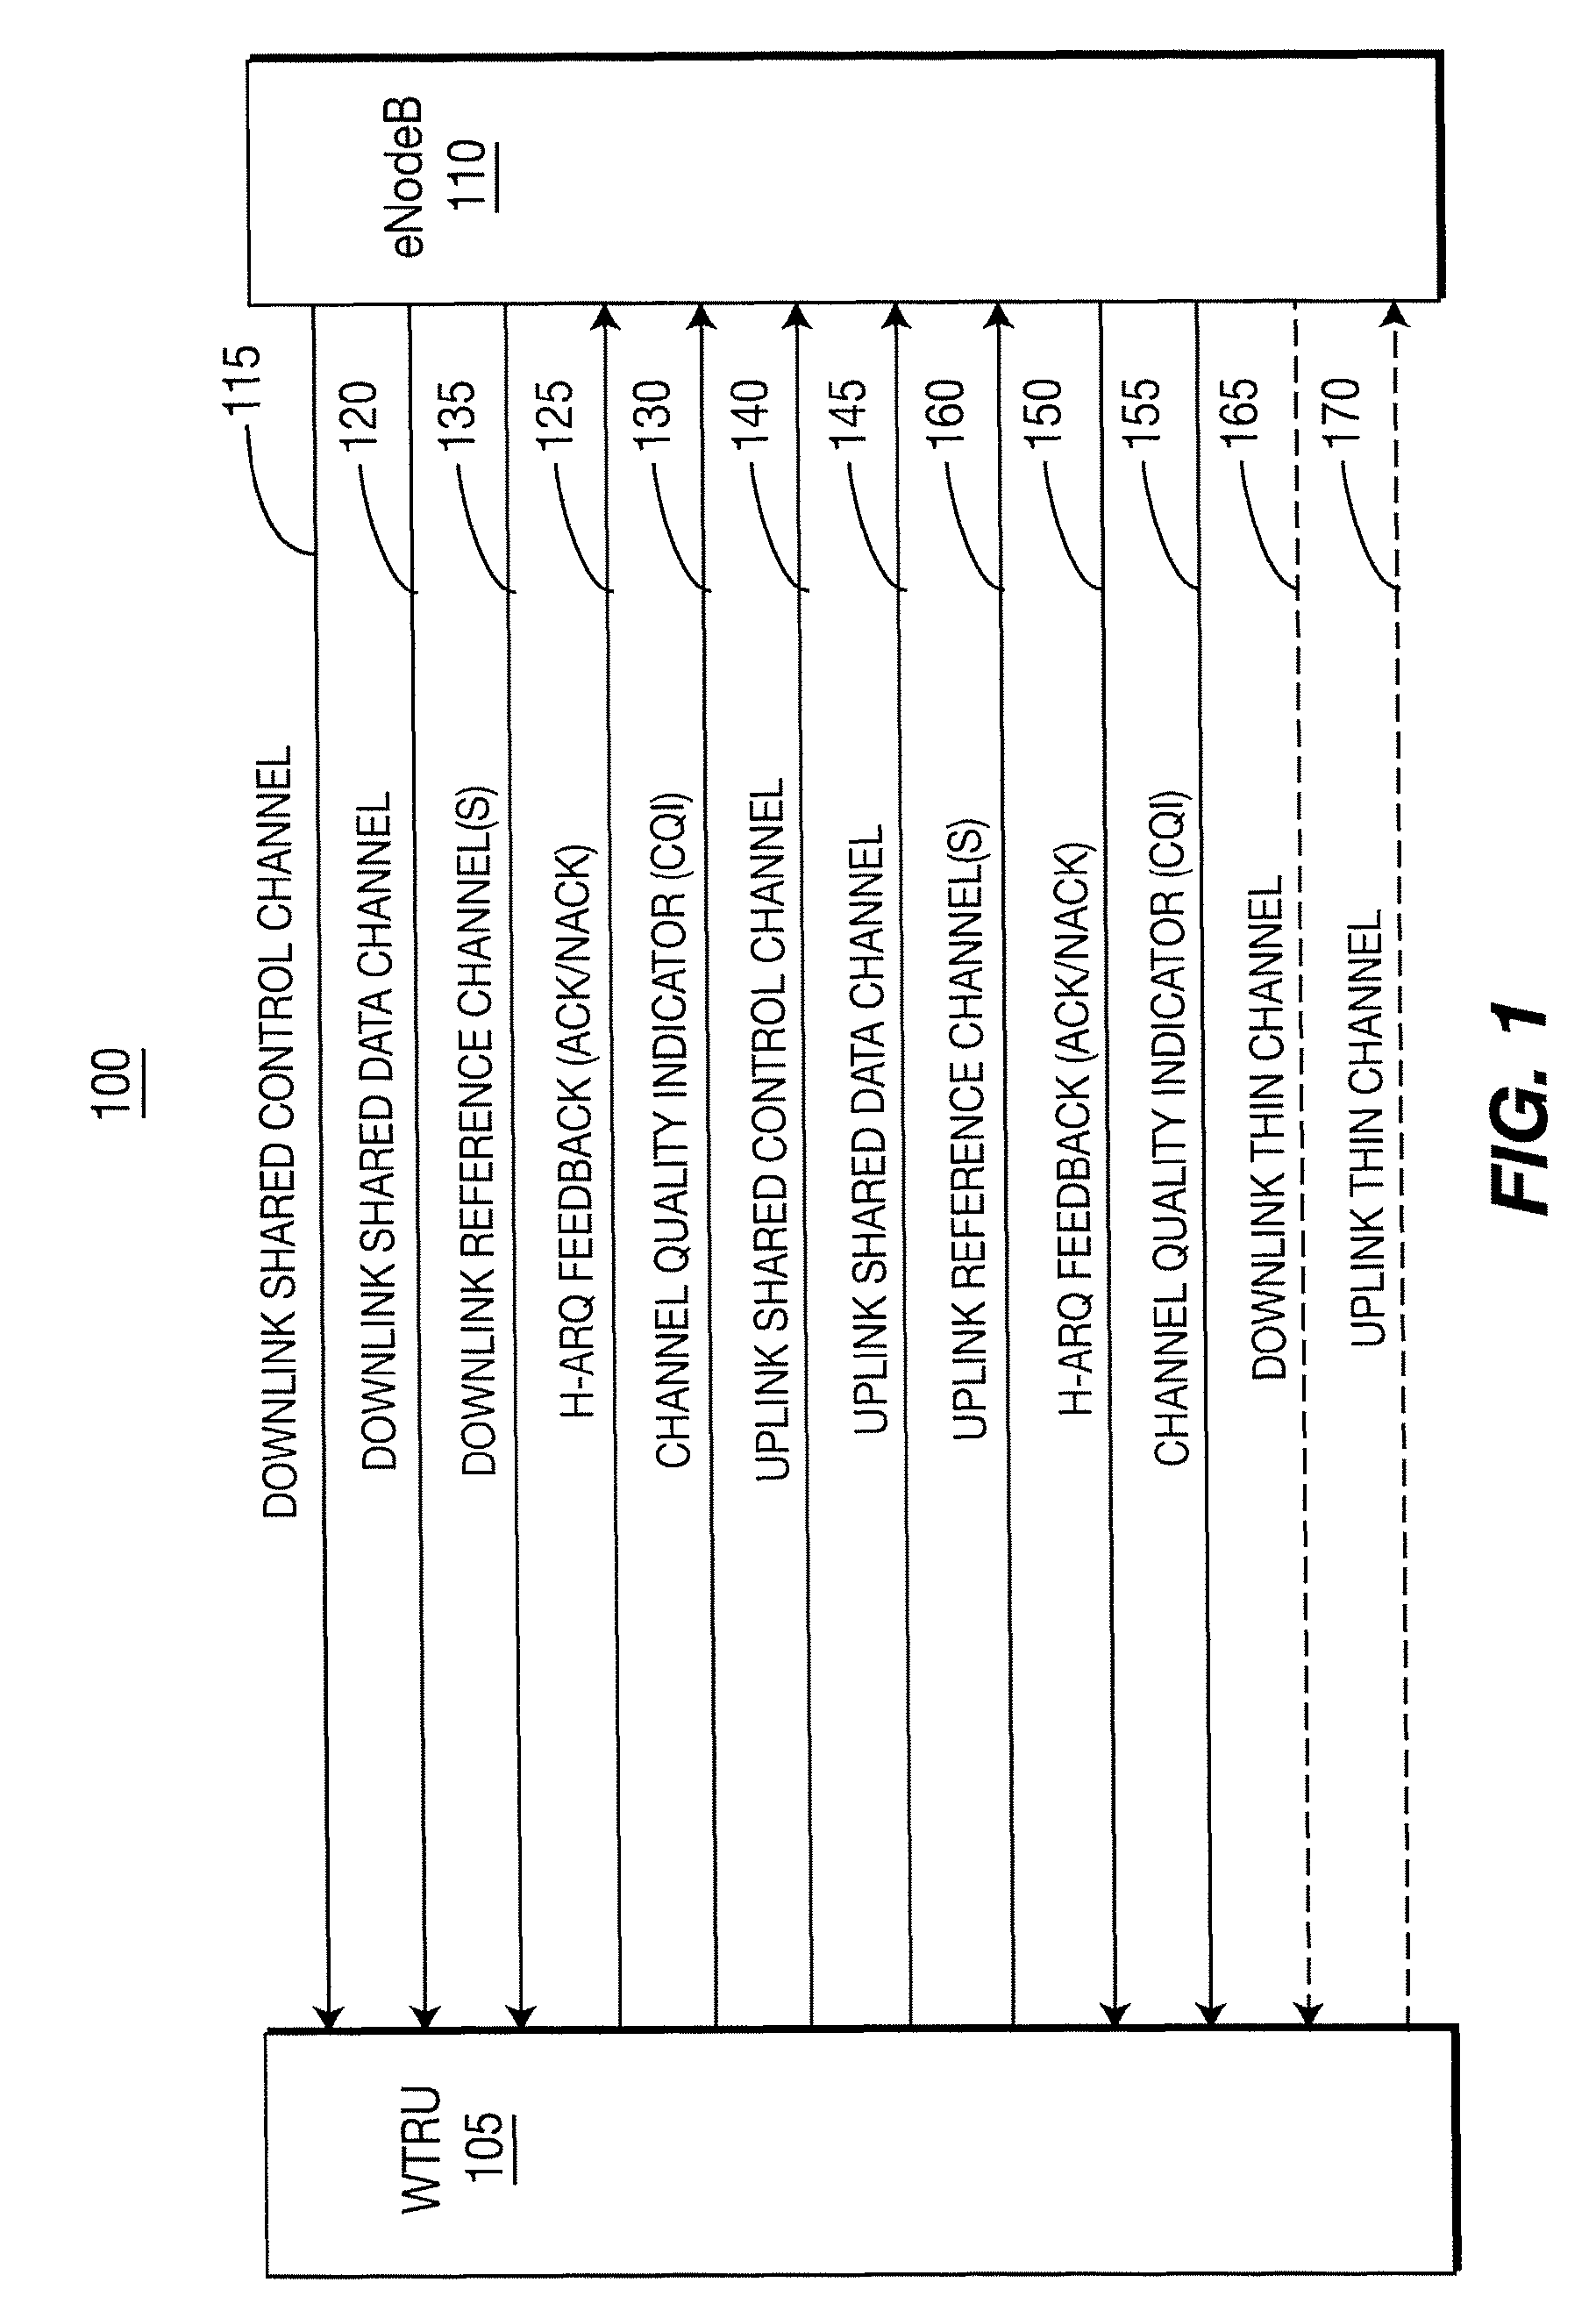 Radio link failure detection procedures in long term evolution uplink and downlink and apparatus therefor